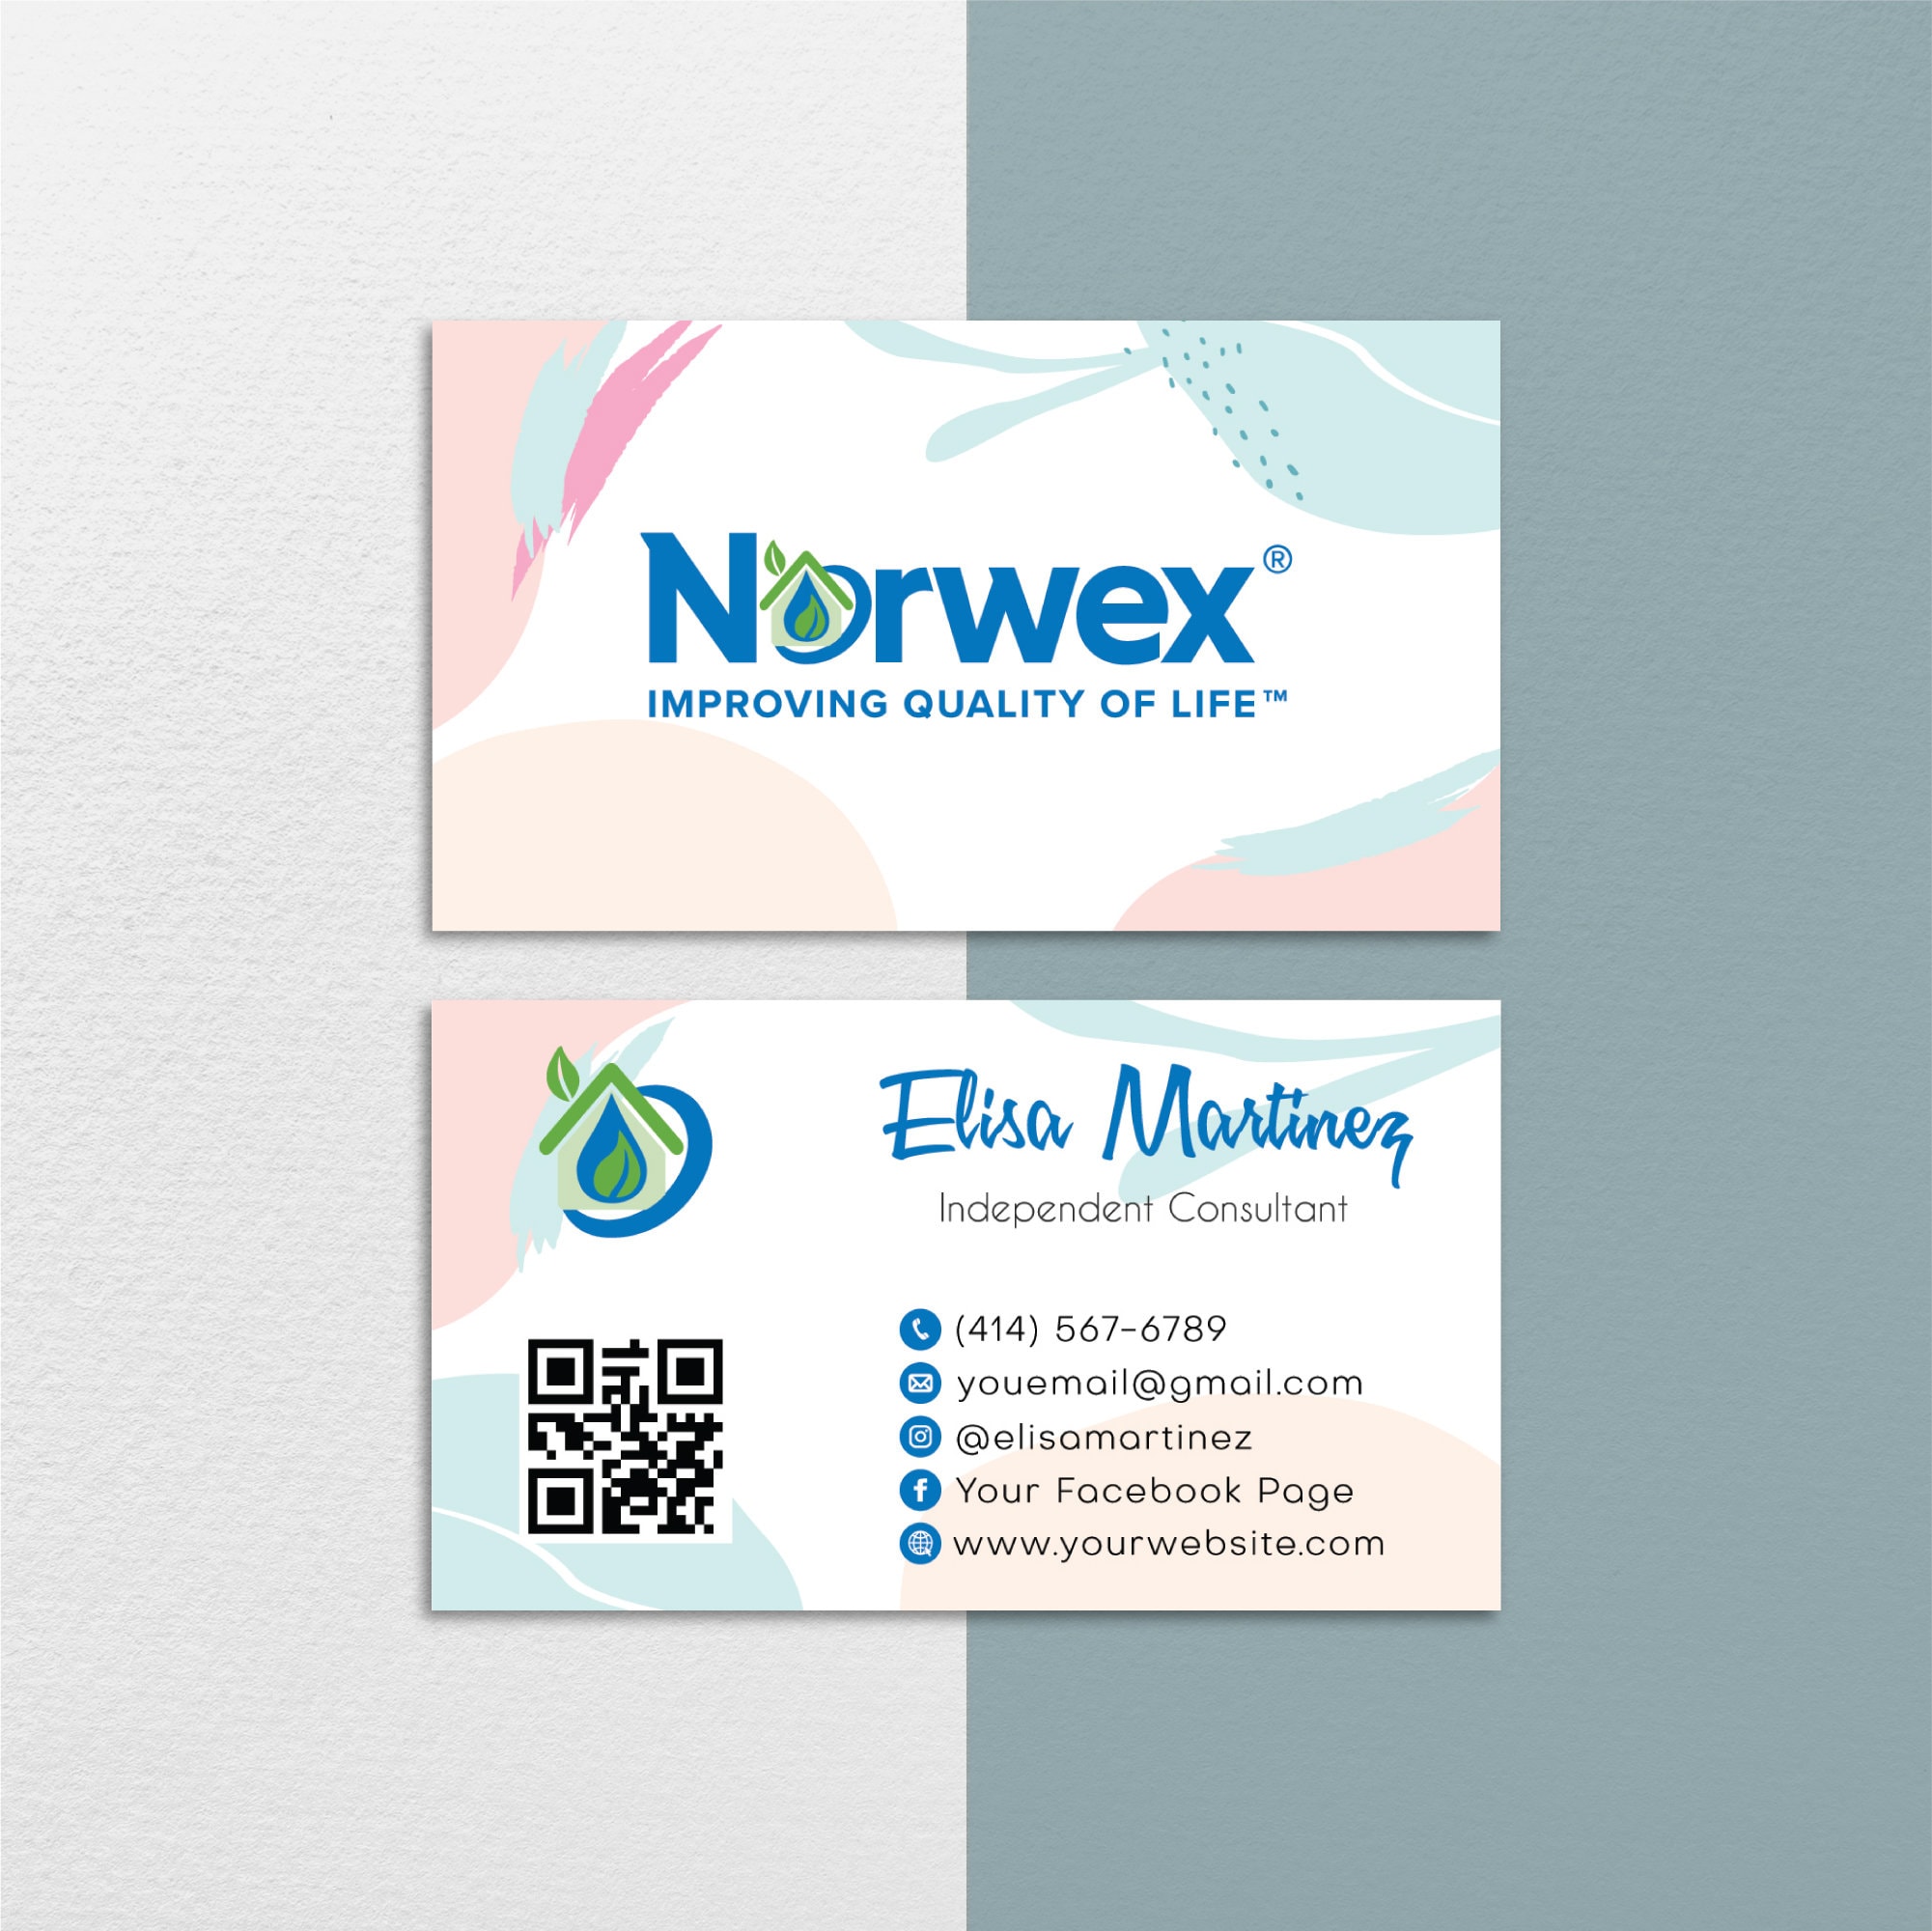 paper-paper-party-supplies-norwex-green-cards-norwex-template-nr44